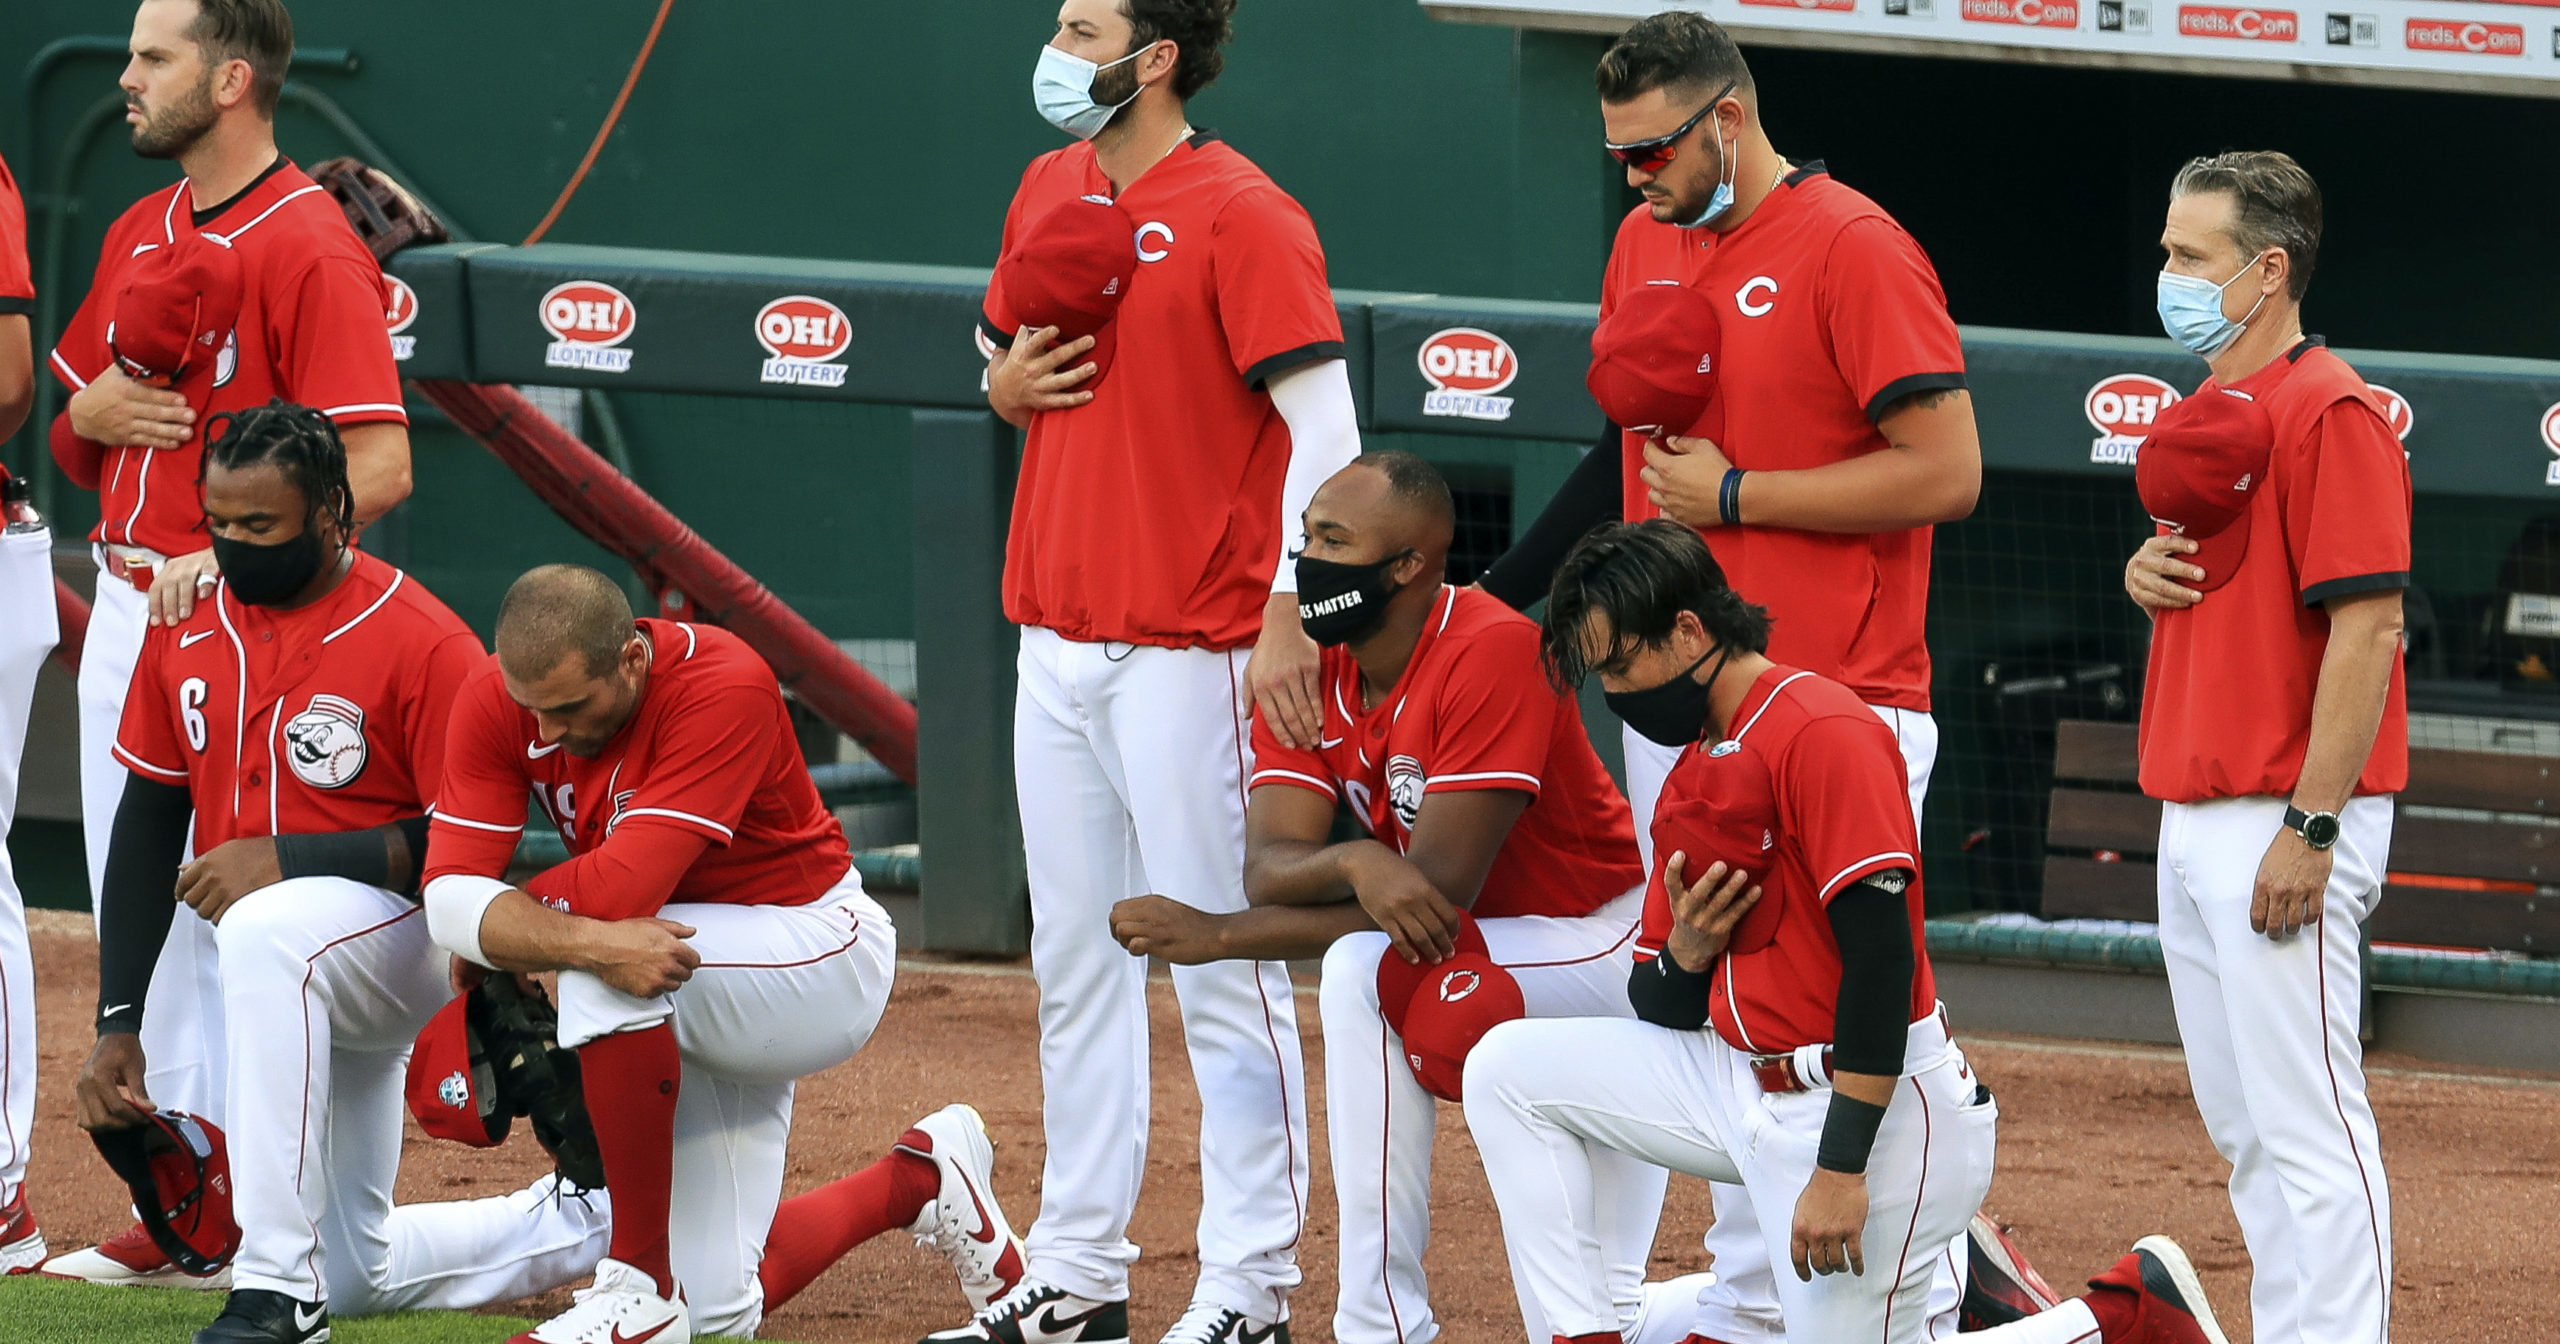 Cincinnati Reds' Phillip Ervin, left, Joey Votto, left middle, Amir Garrett, middle, and Alex Blandino, right, kneel during the national anthem prior to an exhibition baseball game against the Detroit Tigers at Great American Ballpark in Cincinnati on July 21, 2020.